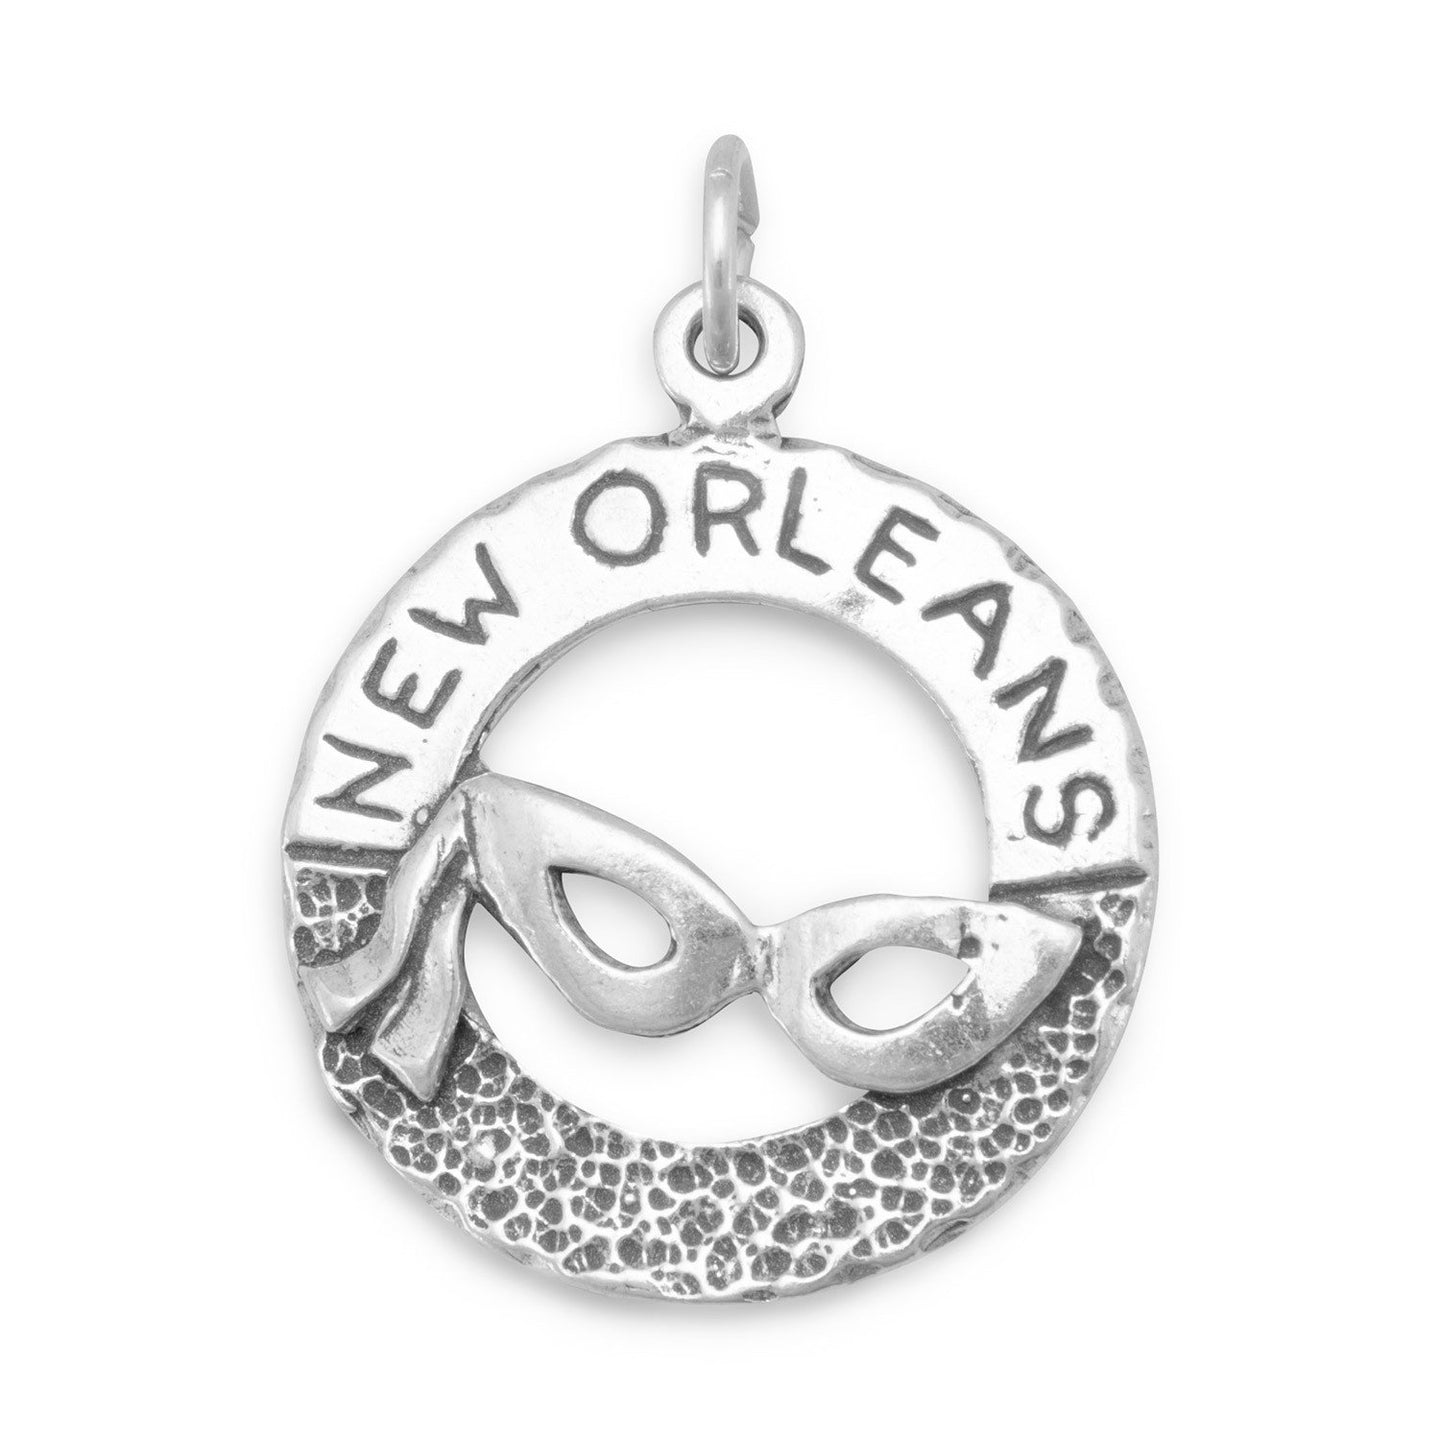 New Orleans with Mardi Gras Mask Charm - SoMag2